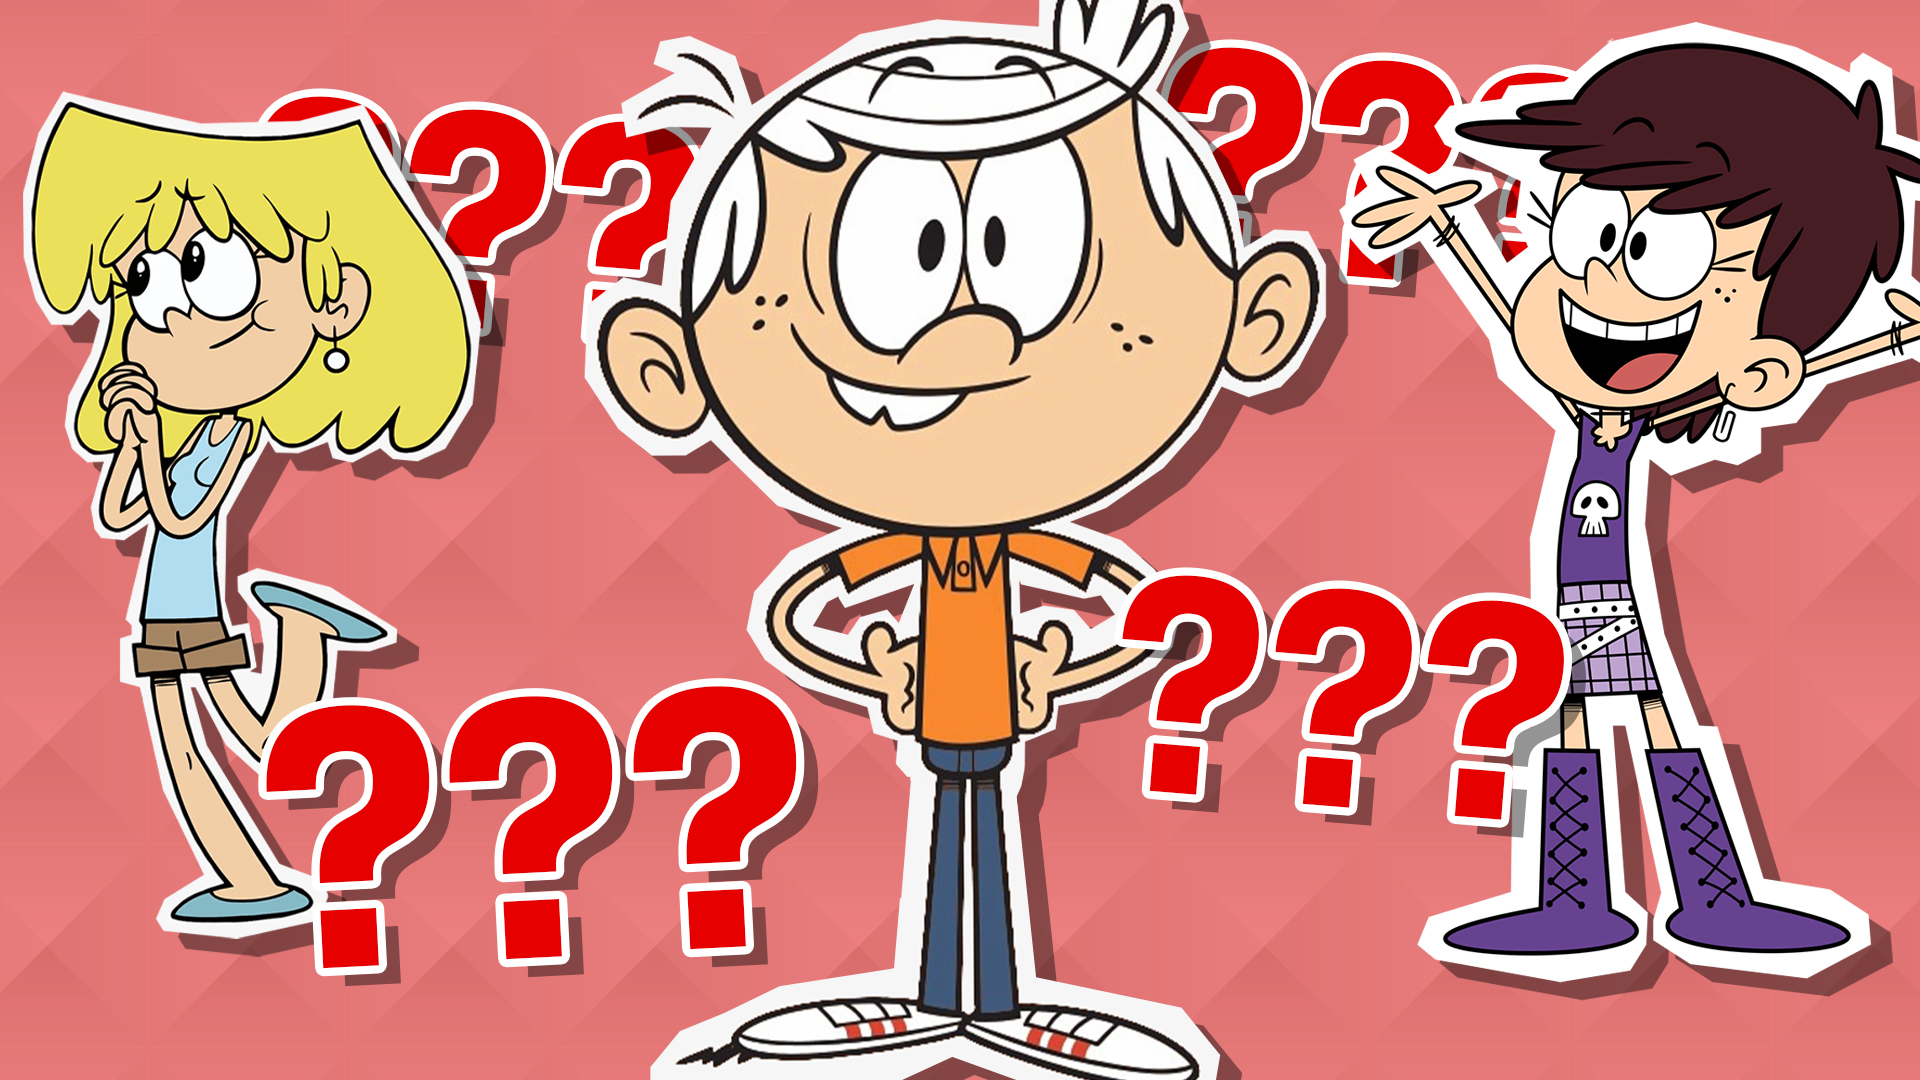 The Loud House personality quiz